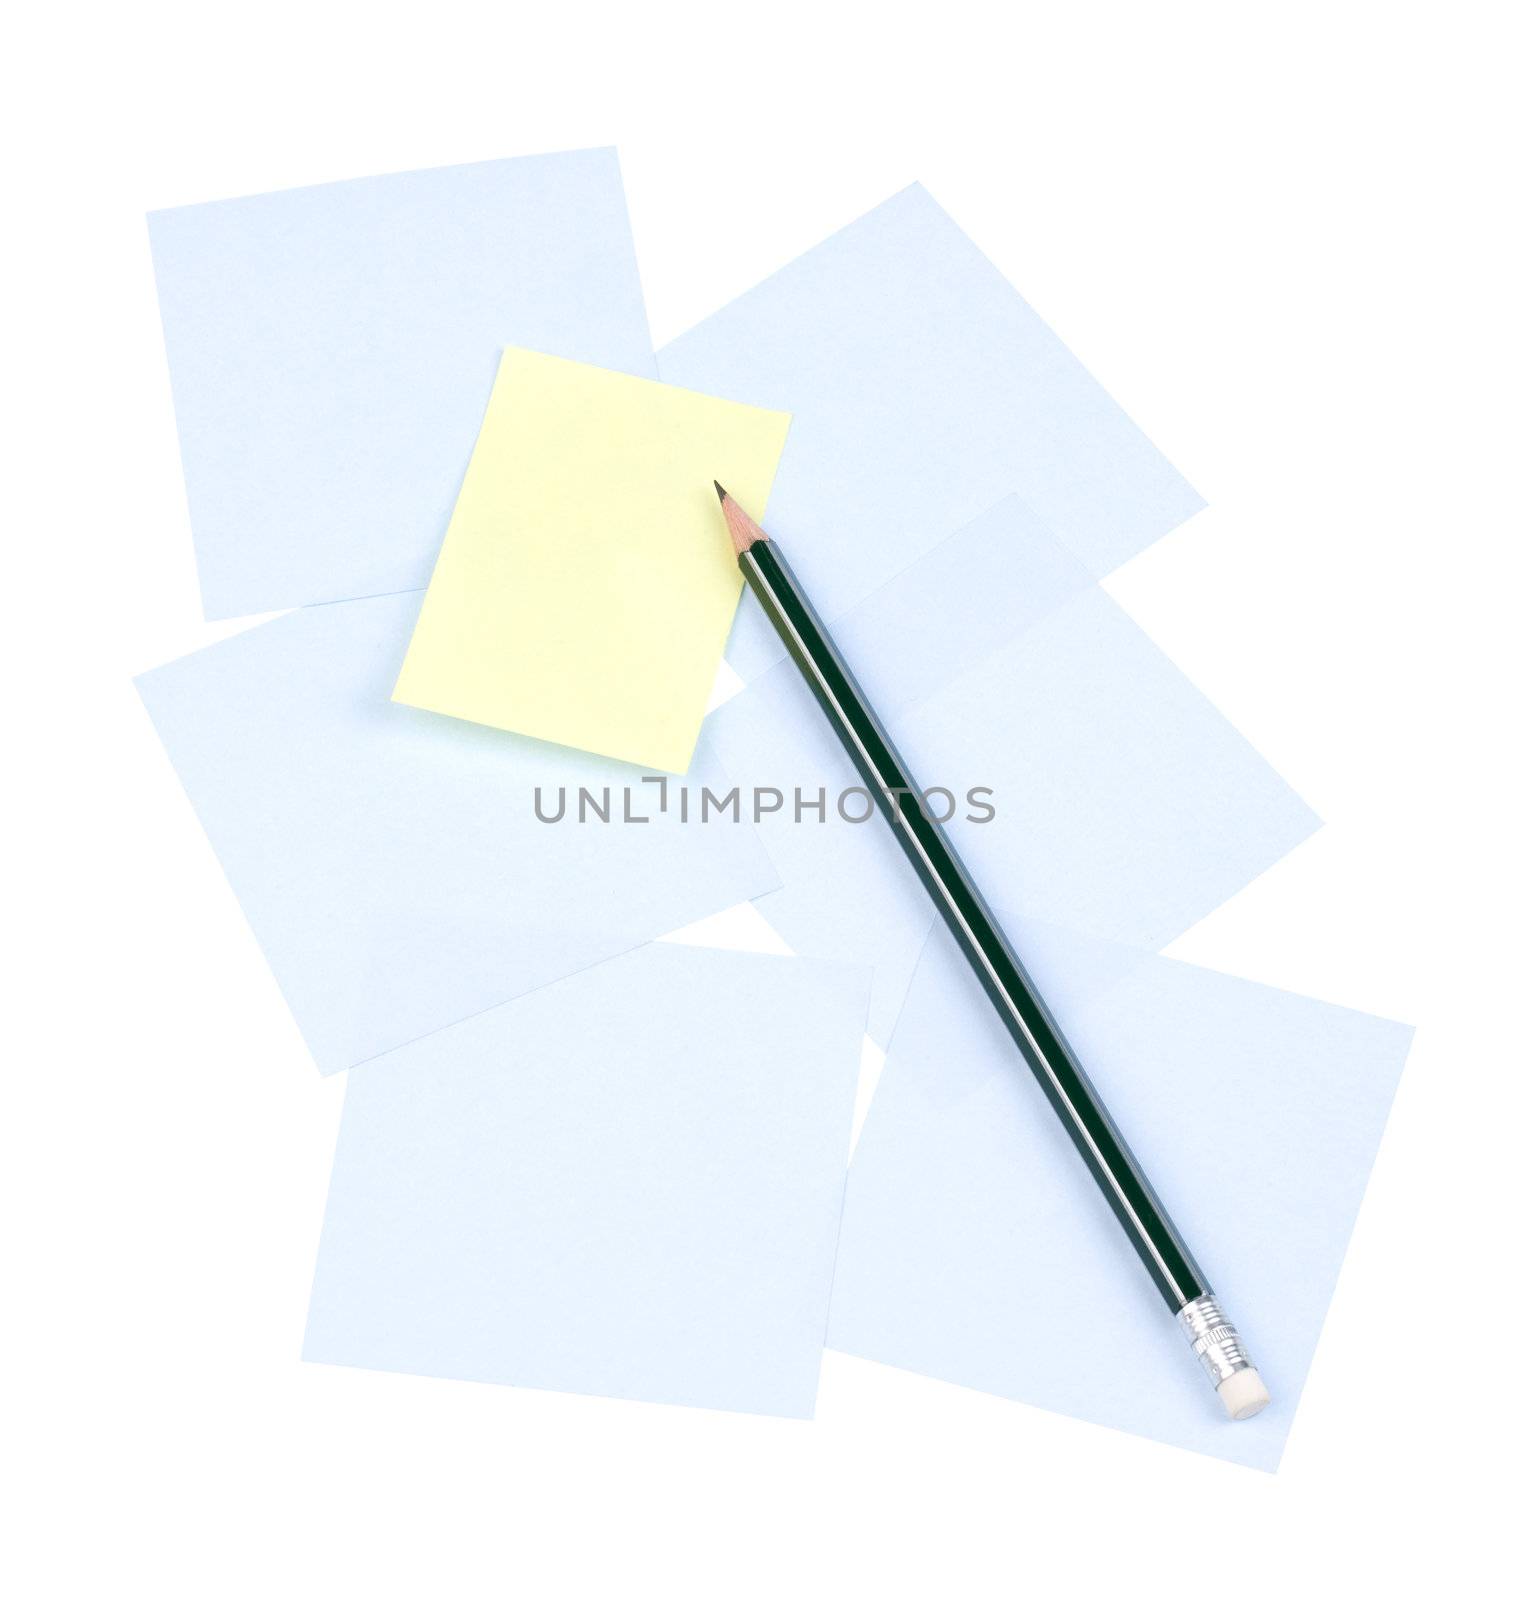 Green pencil on yellow and blue memories sticker. Pattern. Clipping path